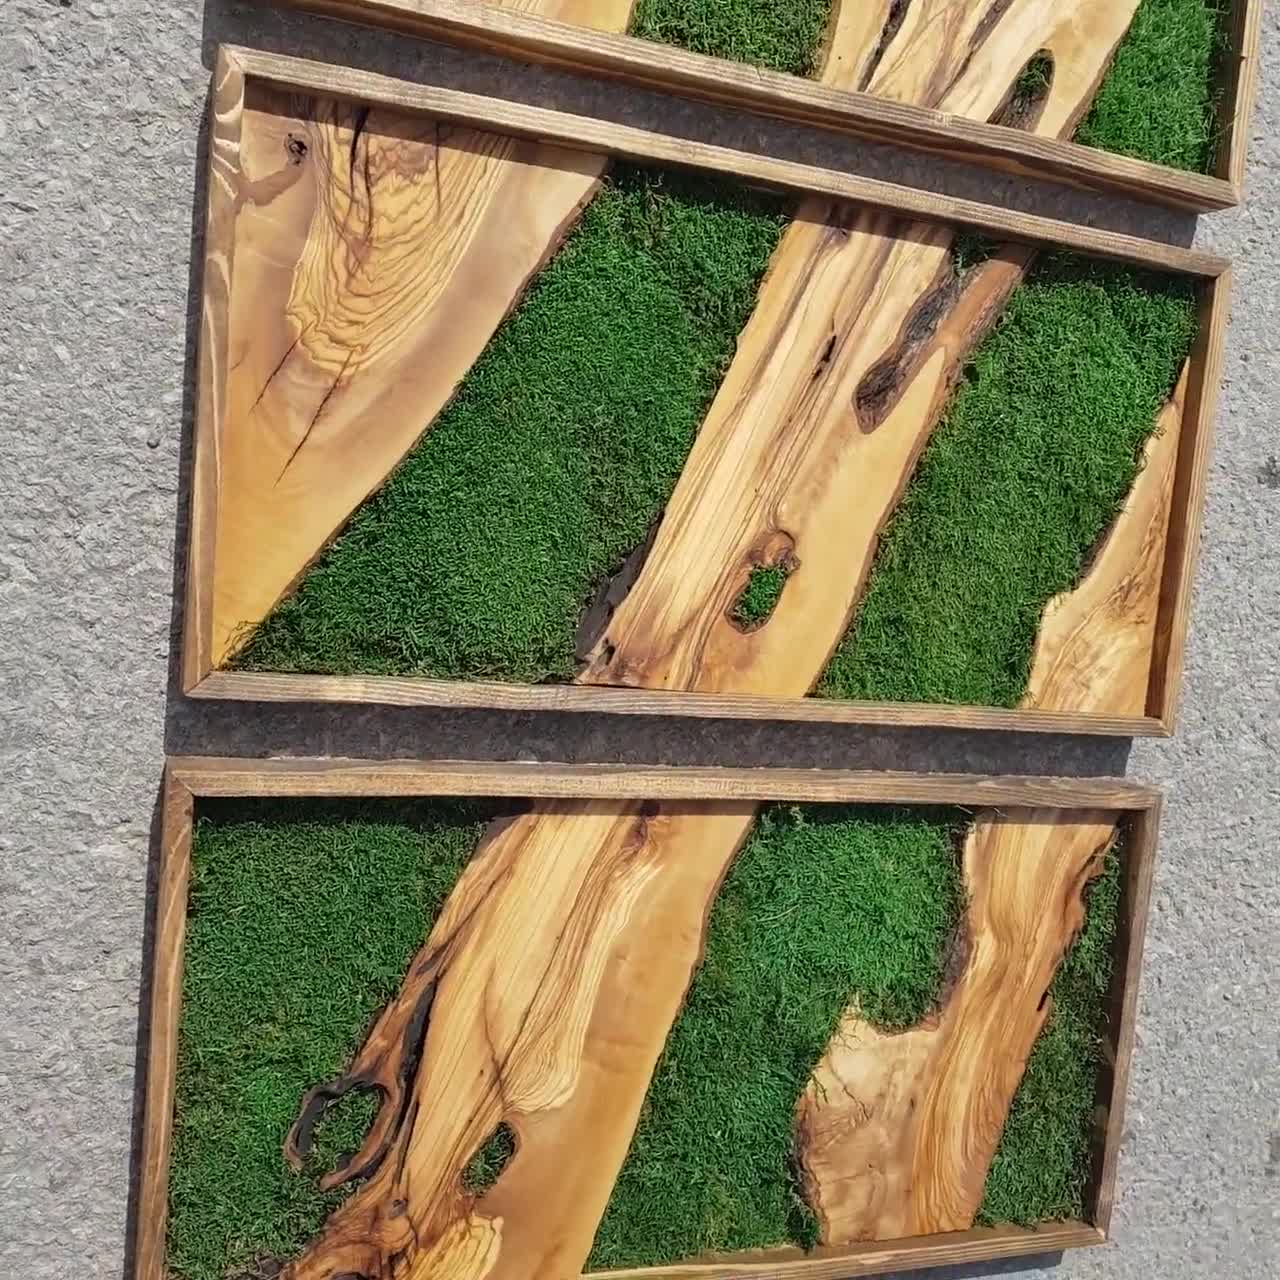 Moss and Olive Wood Wall Art 3 Colors | Premium Handmade Wall Sculptures 24x24